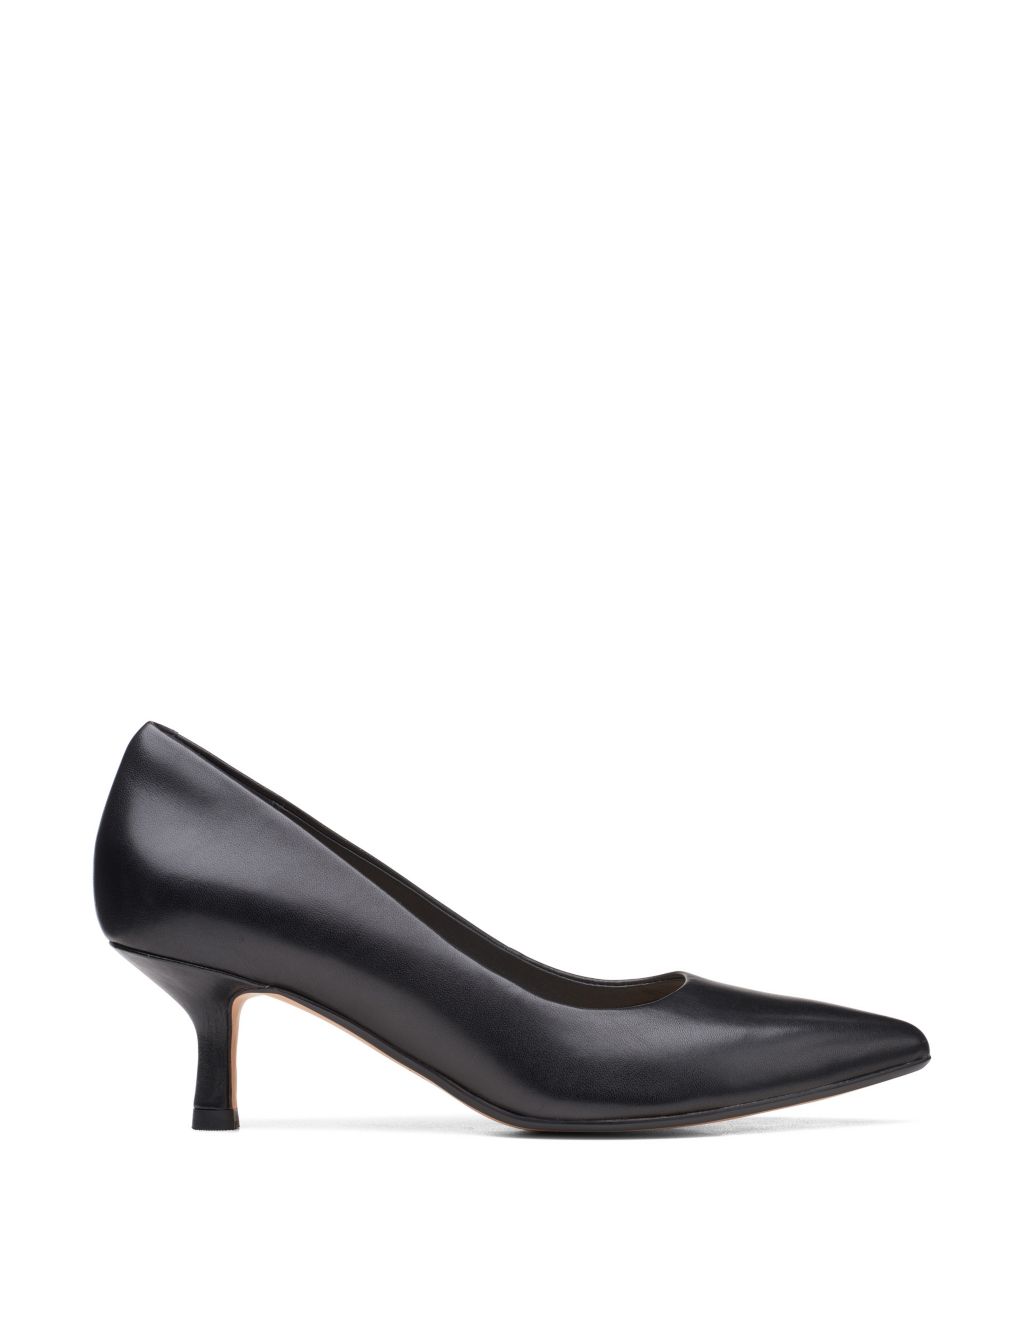 Leather Kitten Heel Court Shoes image 1